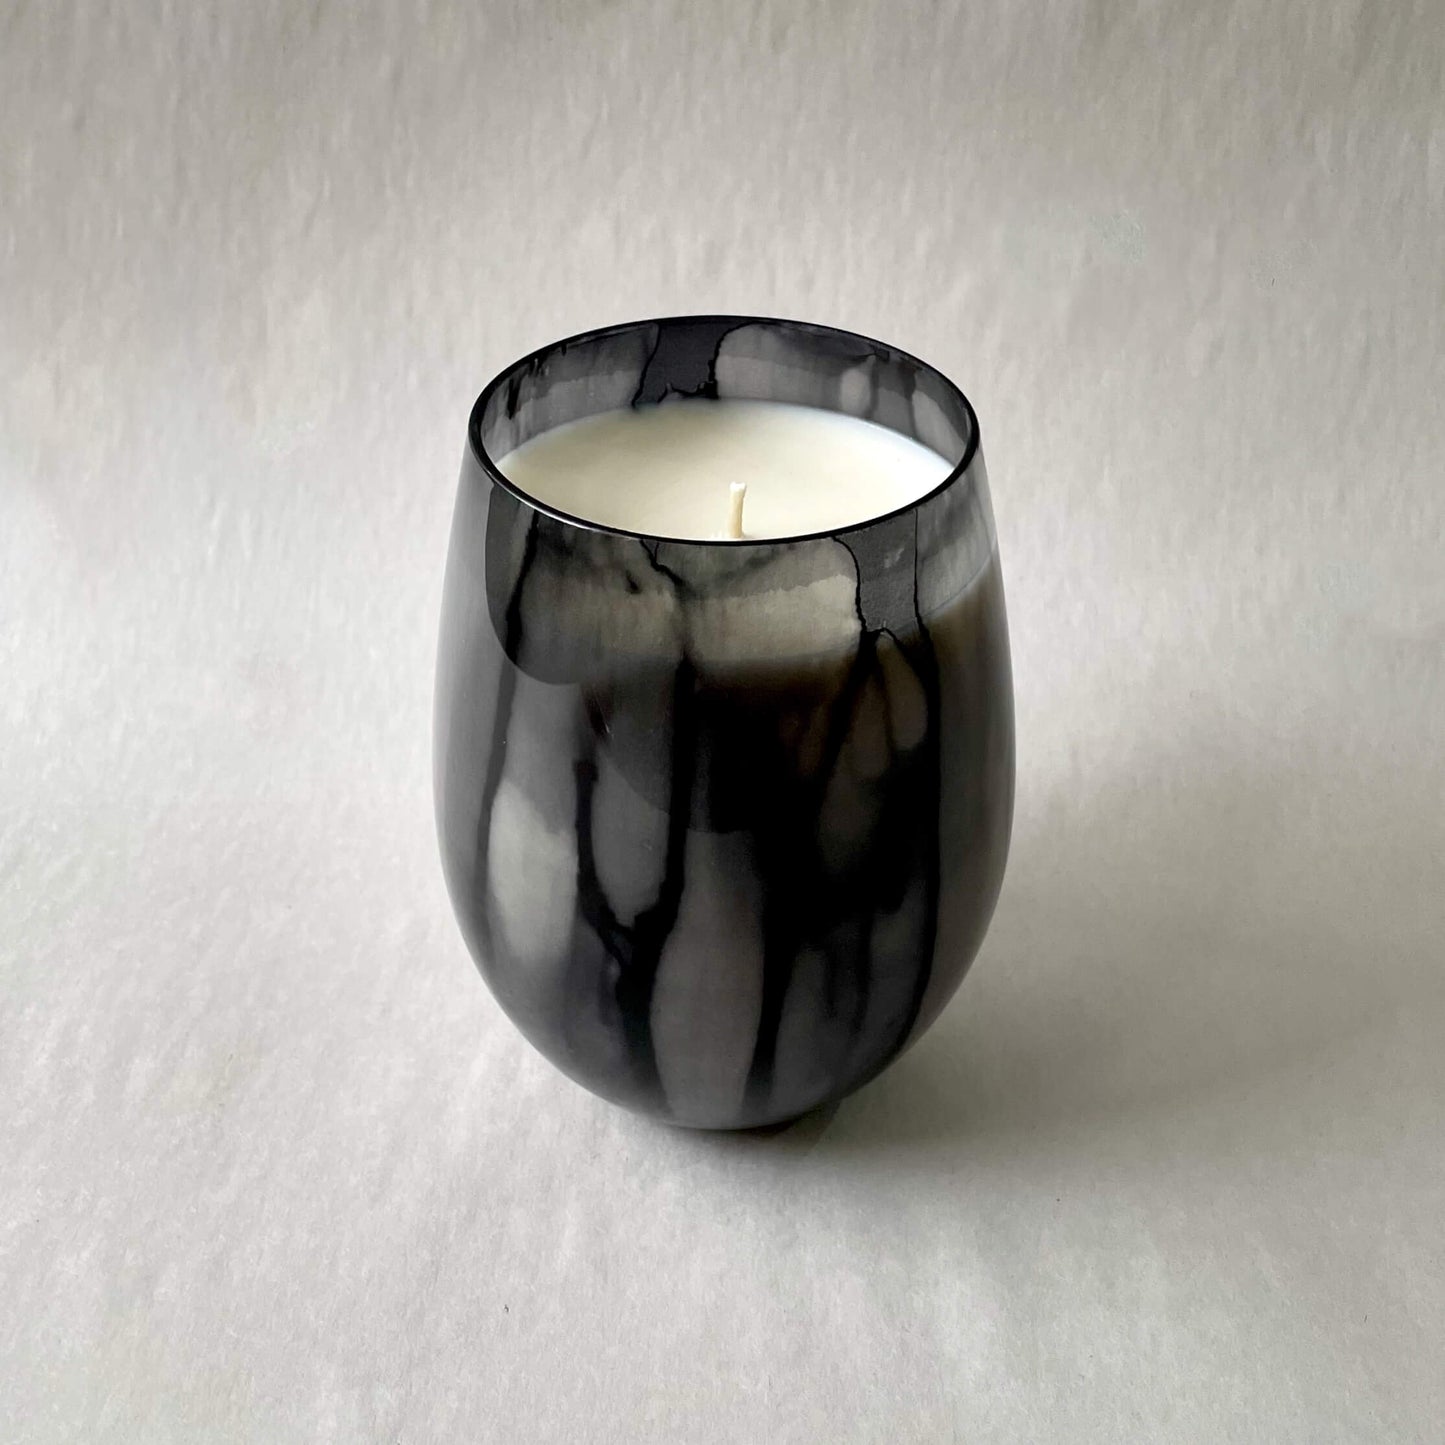 Clean Burning Pure Soy Scented Aromatherapy Candle in Luxurious Decor Style Hand Painted Vessel